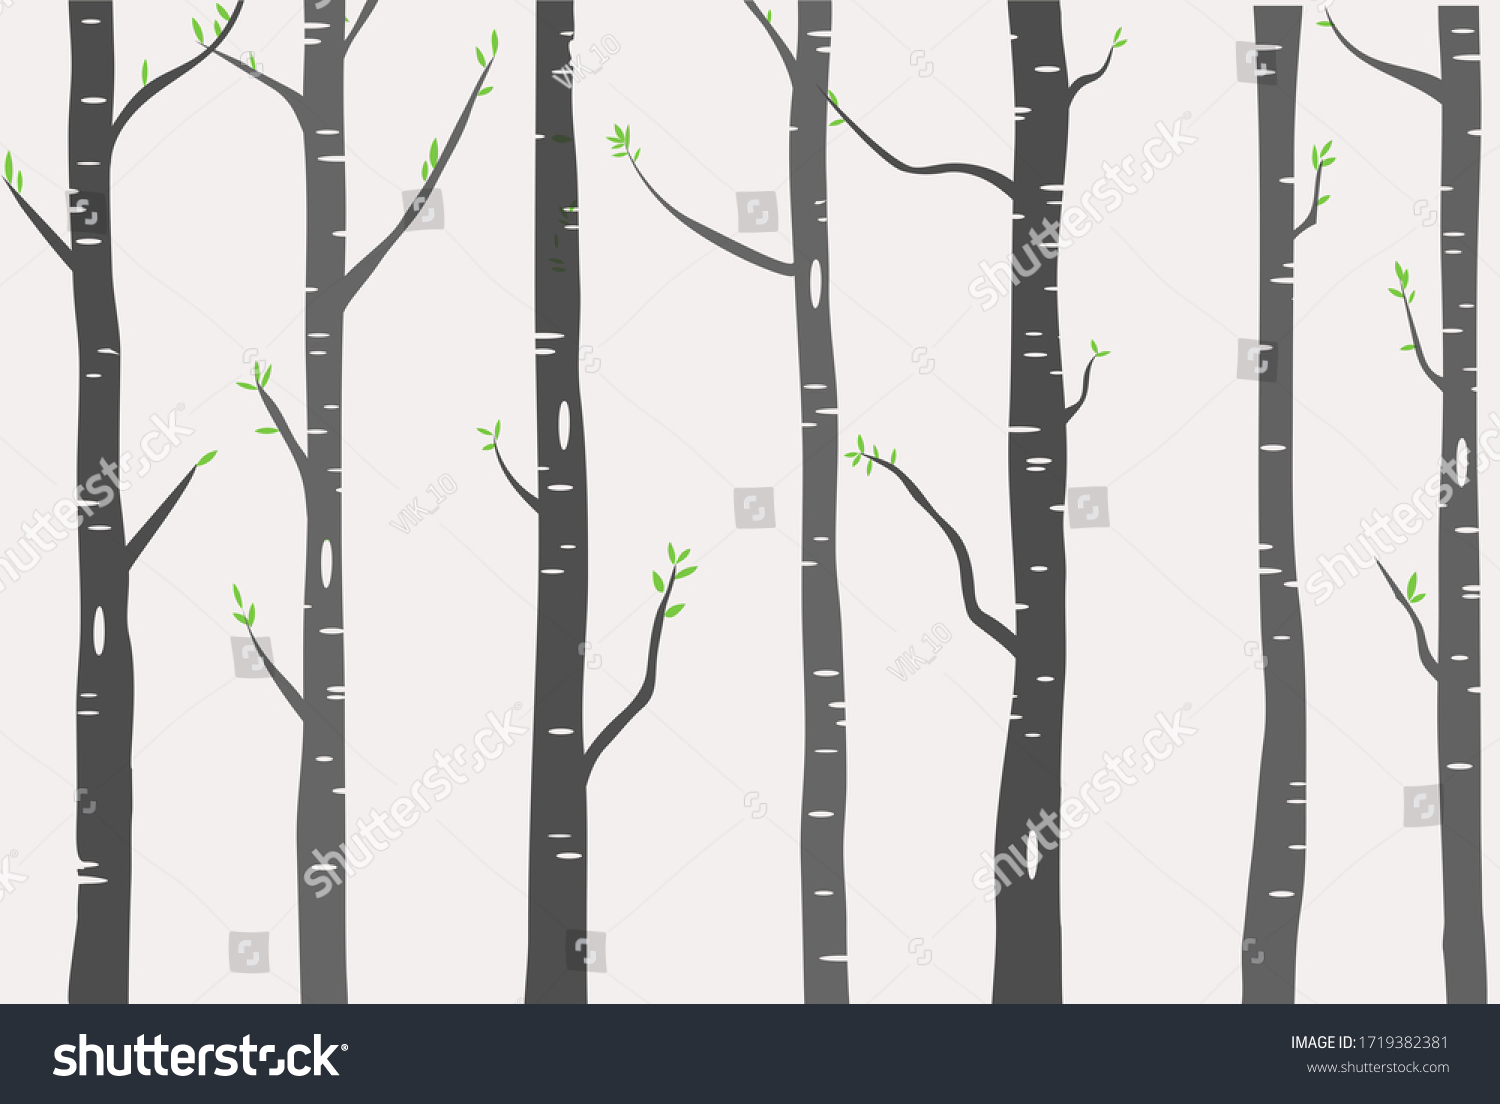 SVG of Birch or Aspen Trees with green leaves illustration svg